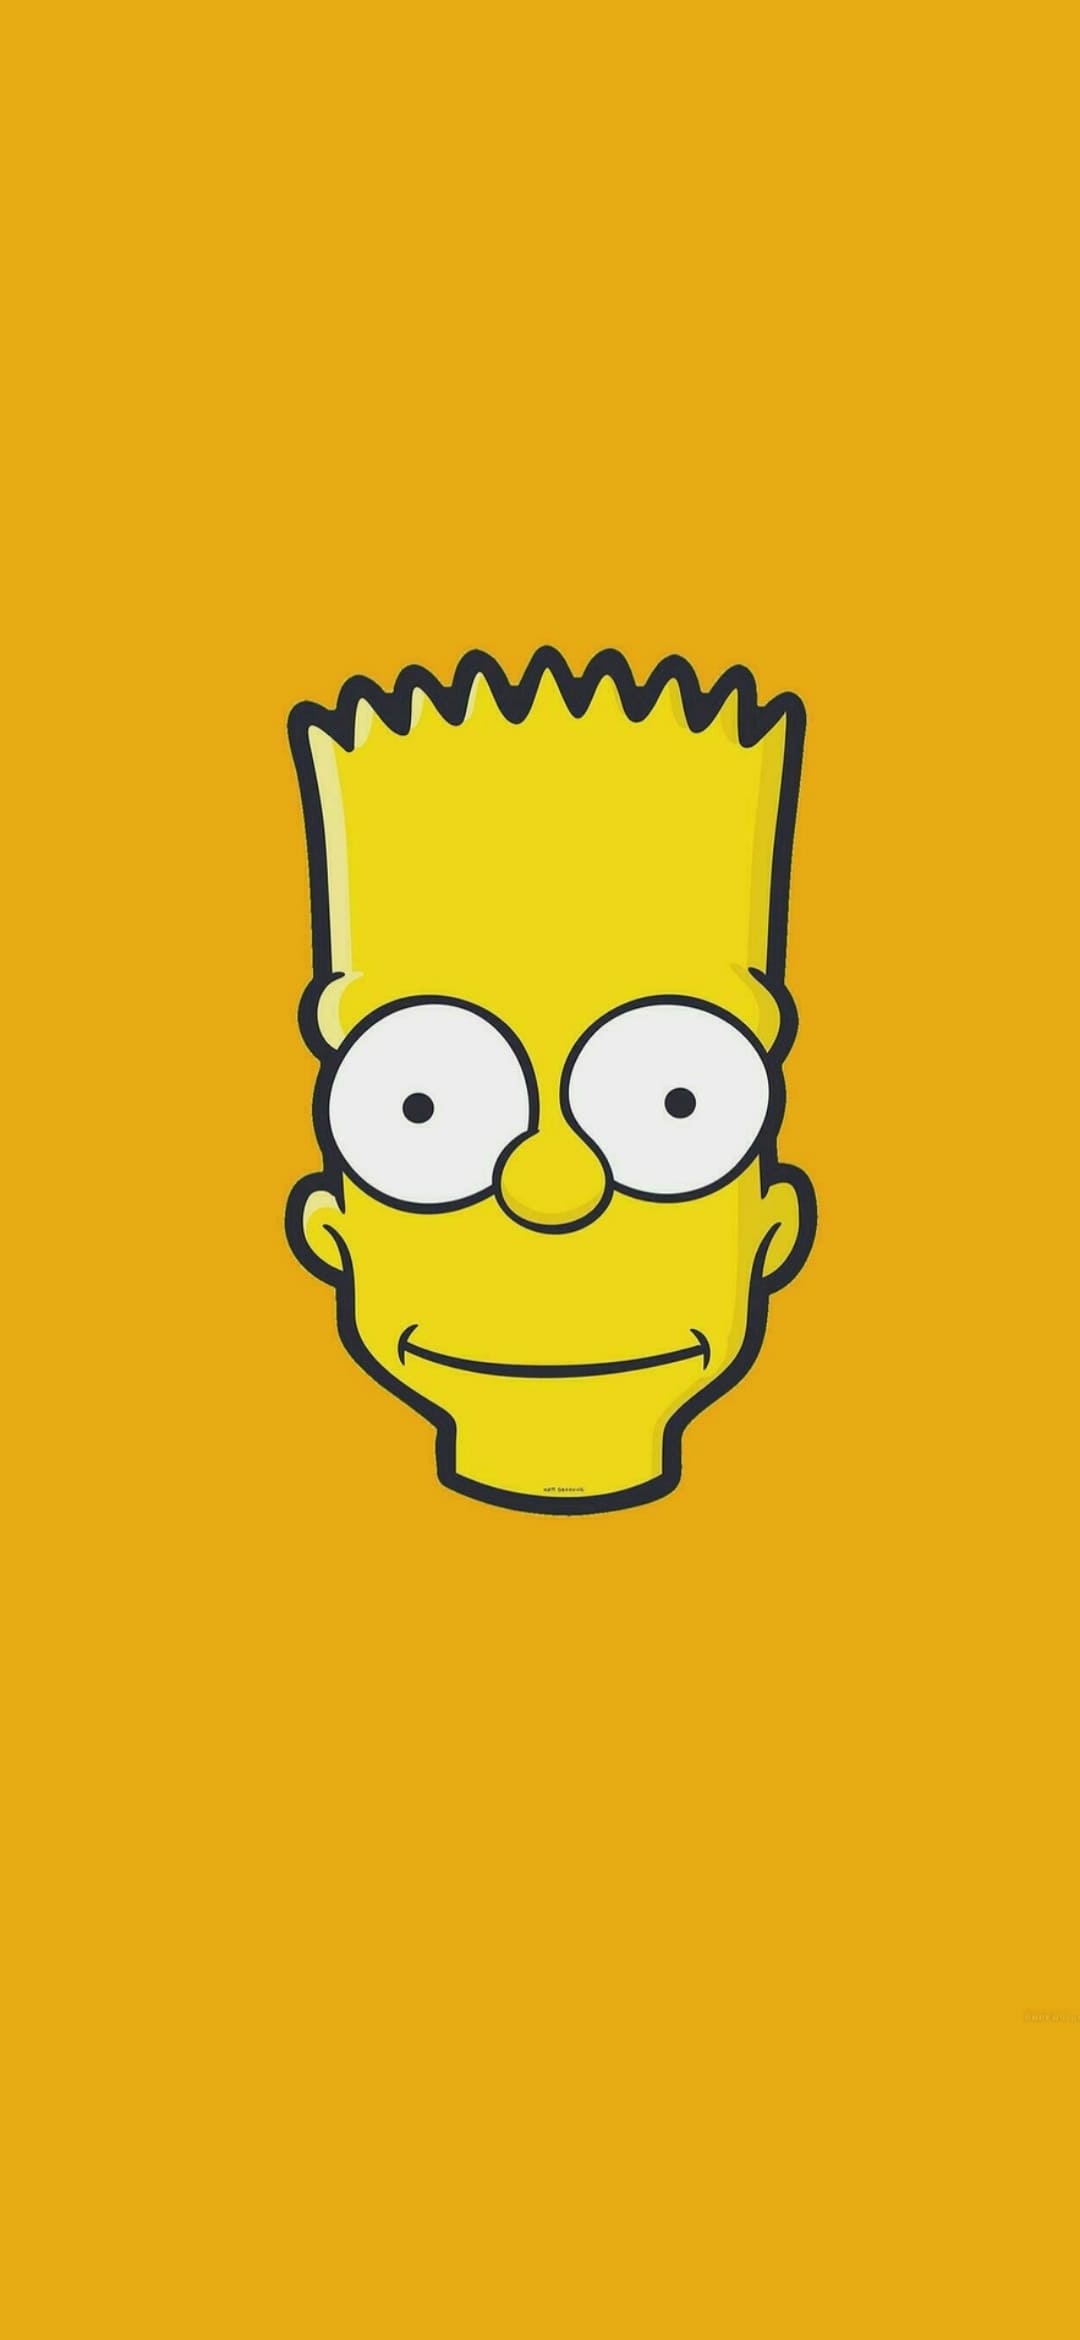 Simpsons Wallpapers Hd